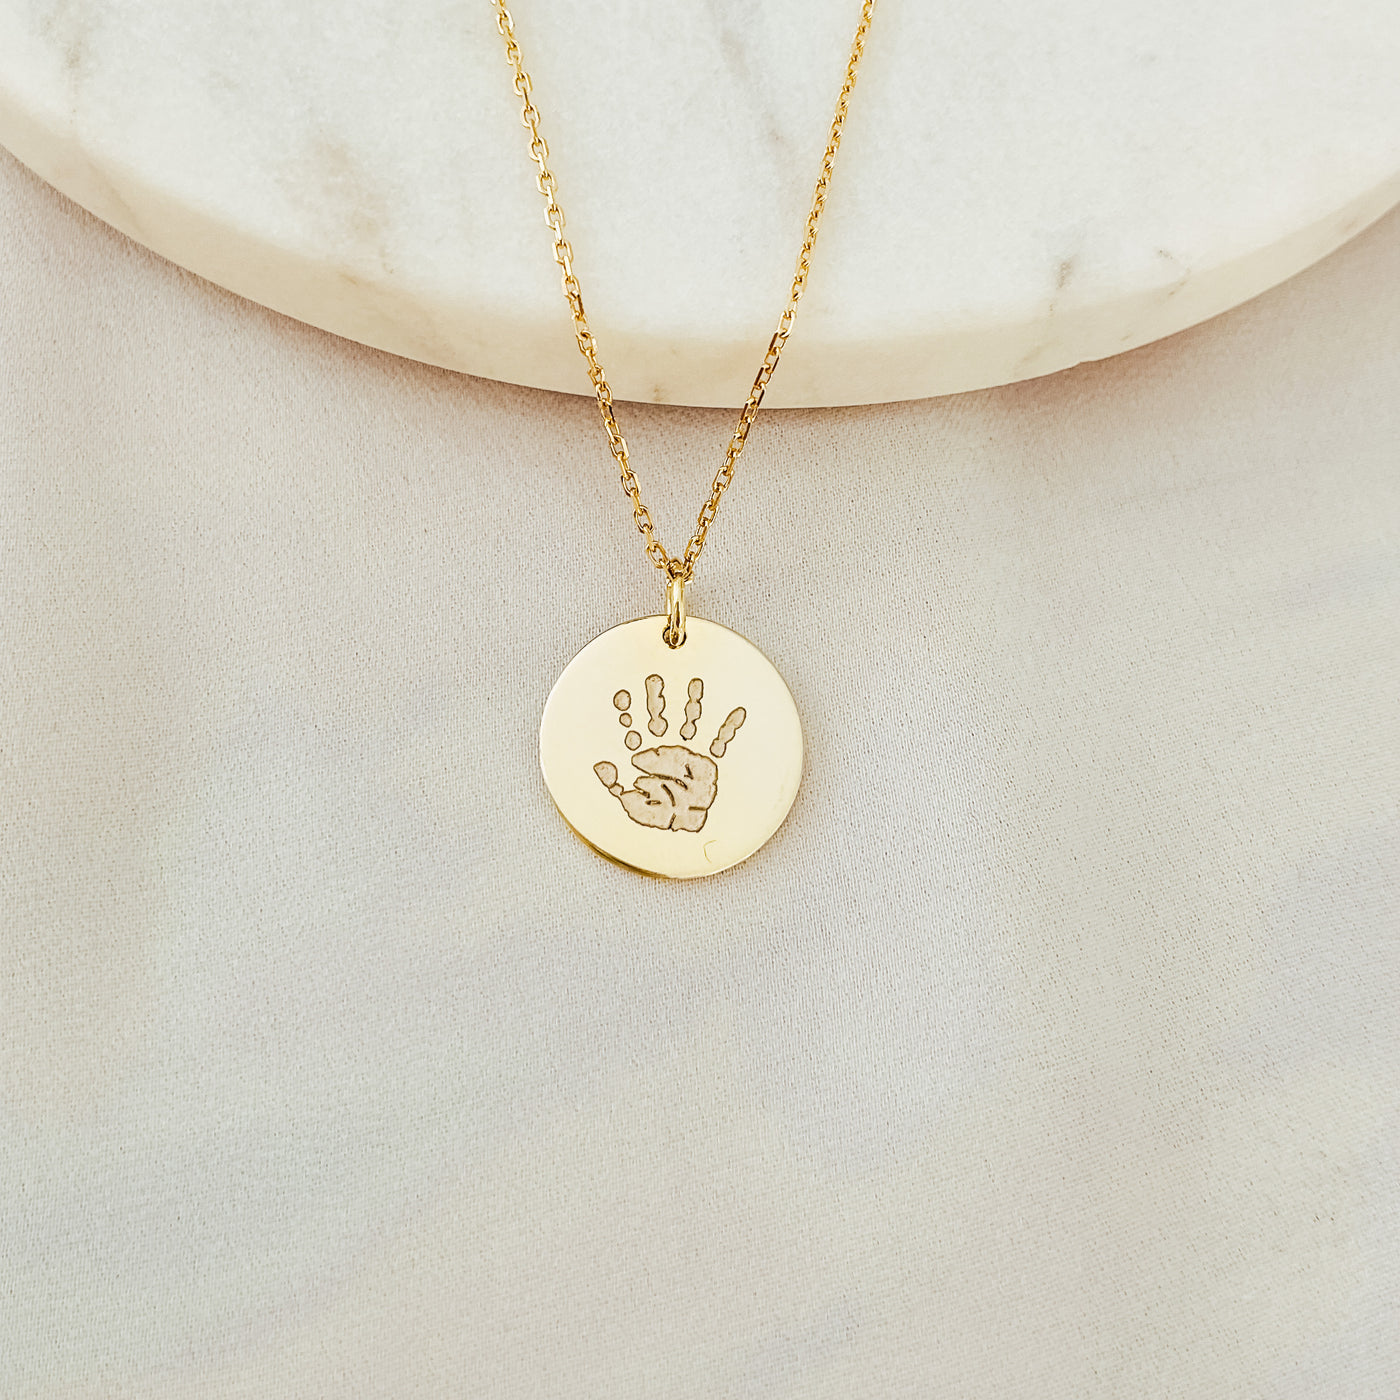 ENGRAVED GOLD AND ROSE GOLD HANDPRINT & FOOTPRINT NECKLACE | forever imprint jewellery